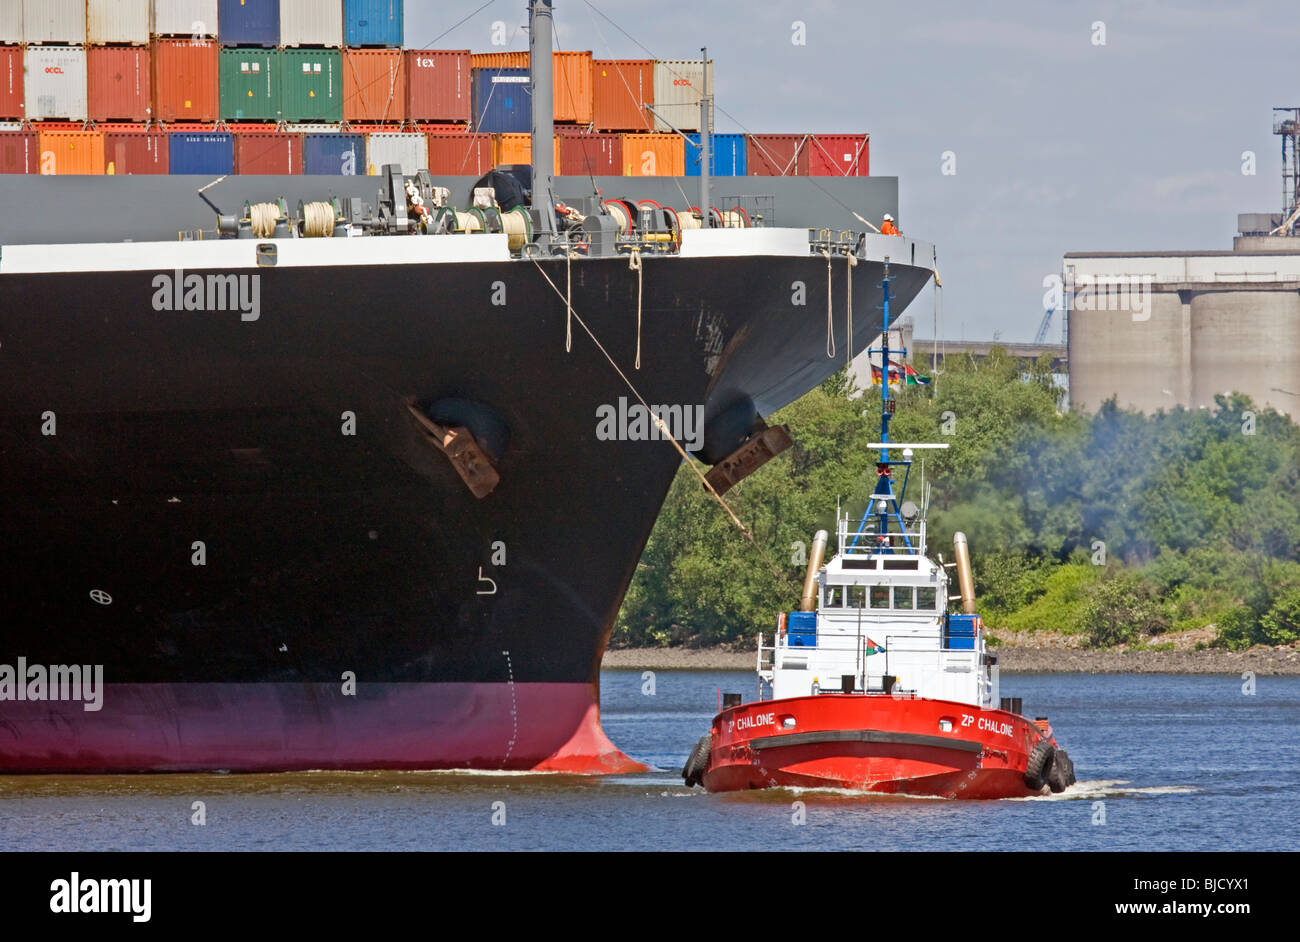 Container ship with tugboat in a harbor Stock Photo